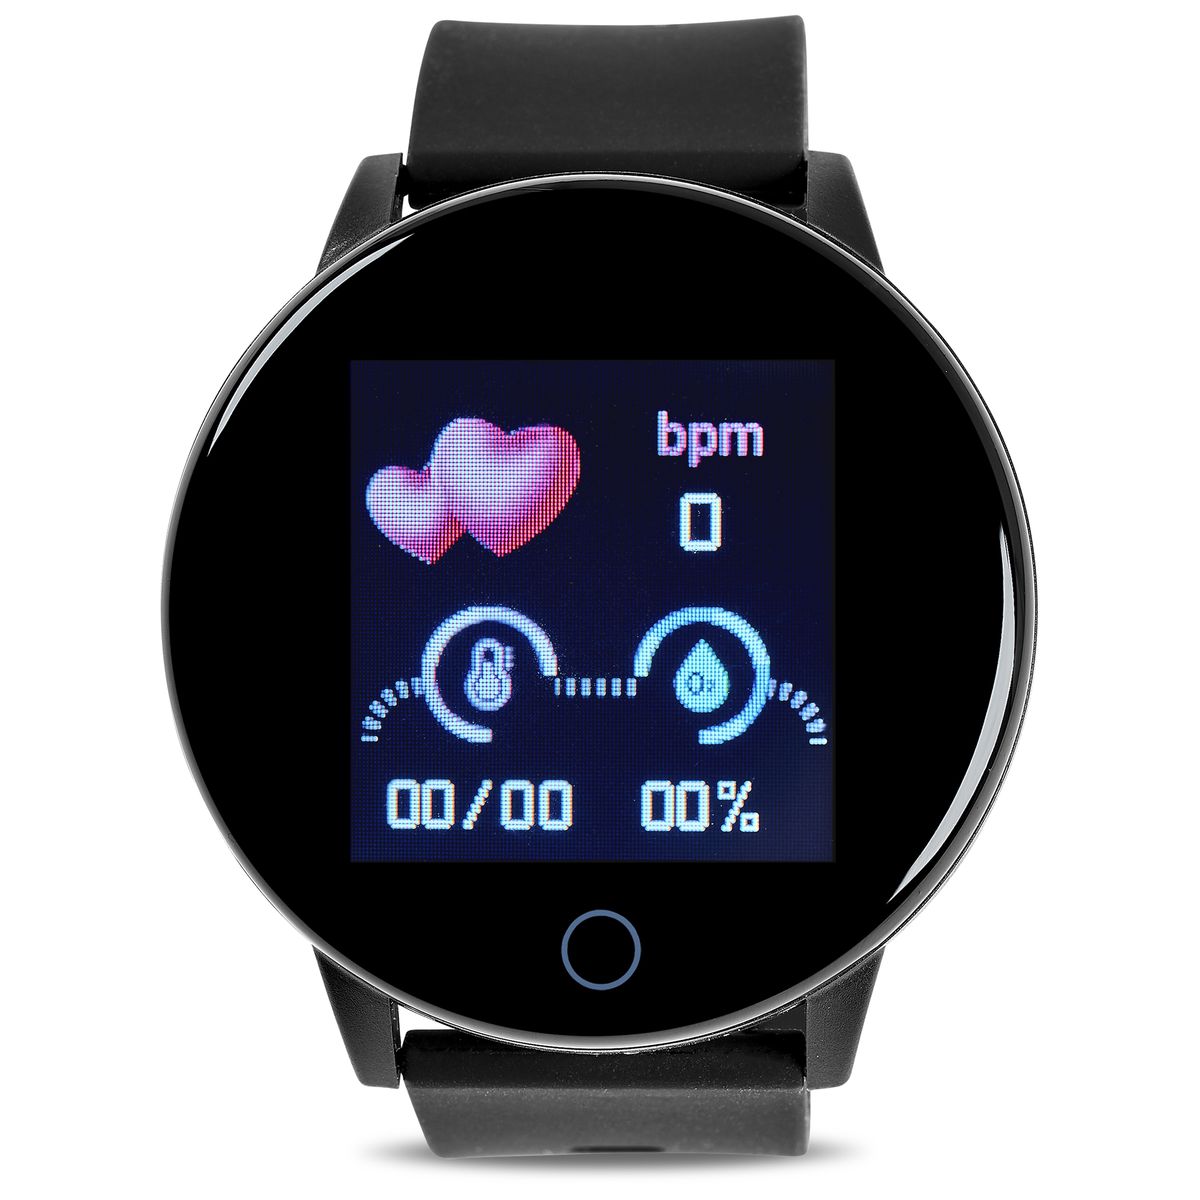 Smart watch Vooma | Shop Today. Get it Tomorrow! | takealot.com